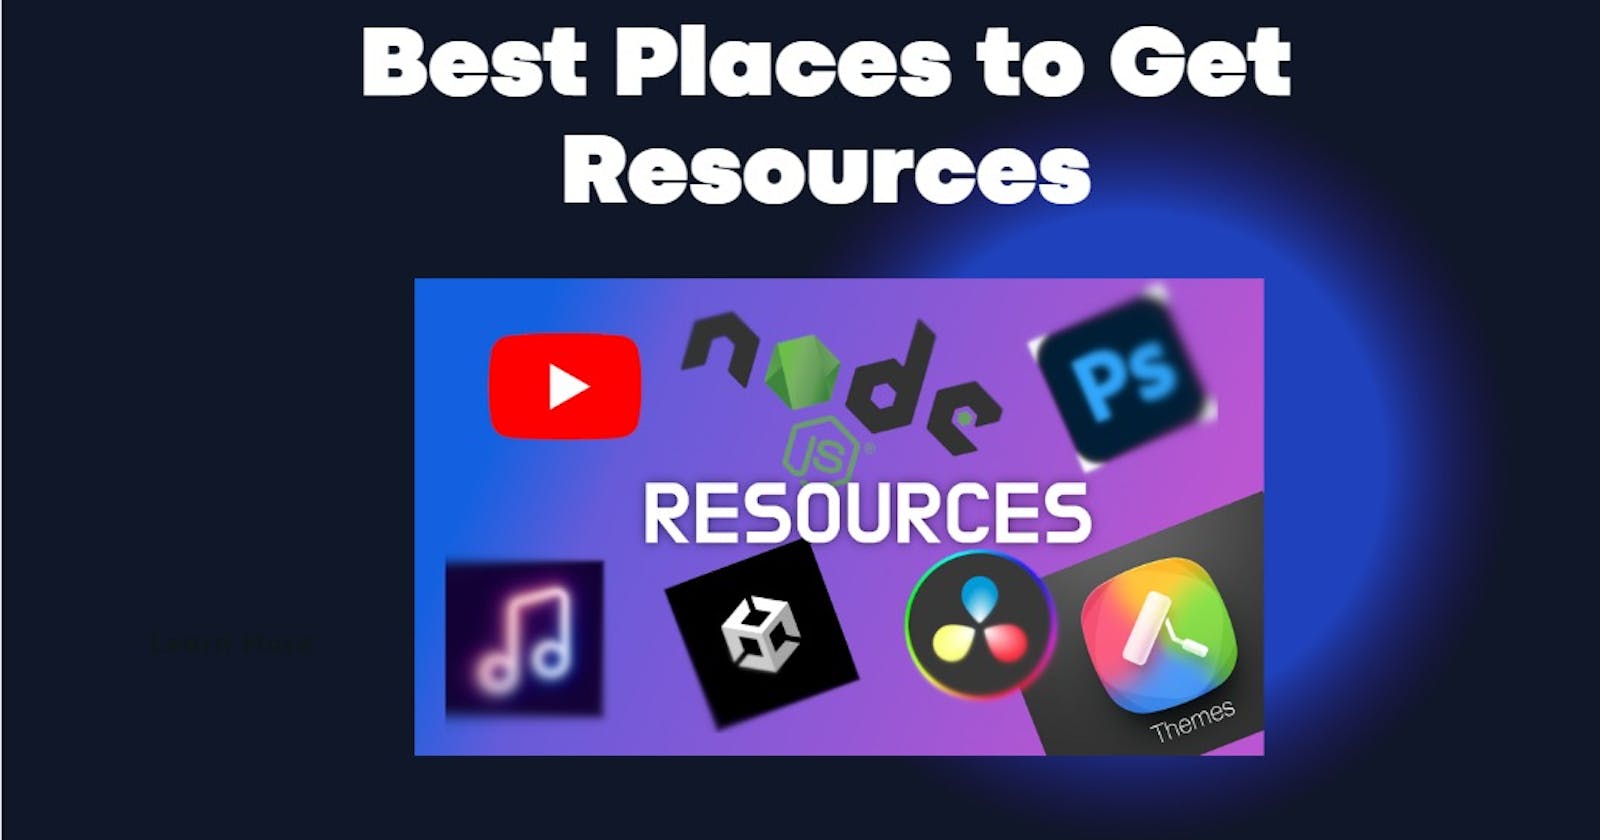 Best Places to Get Resources